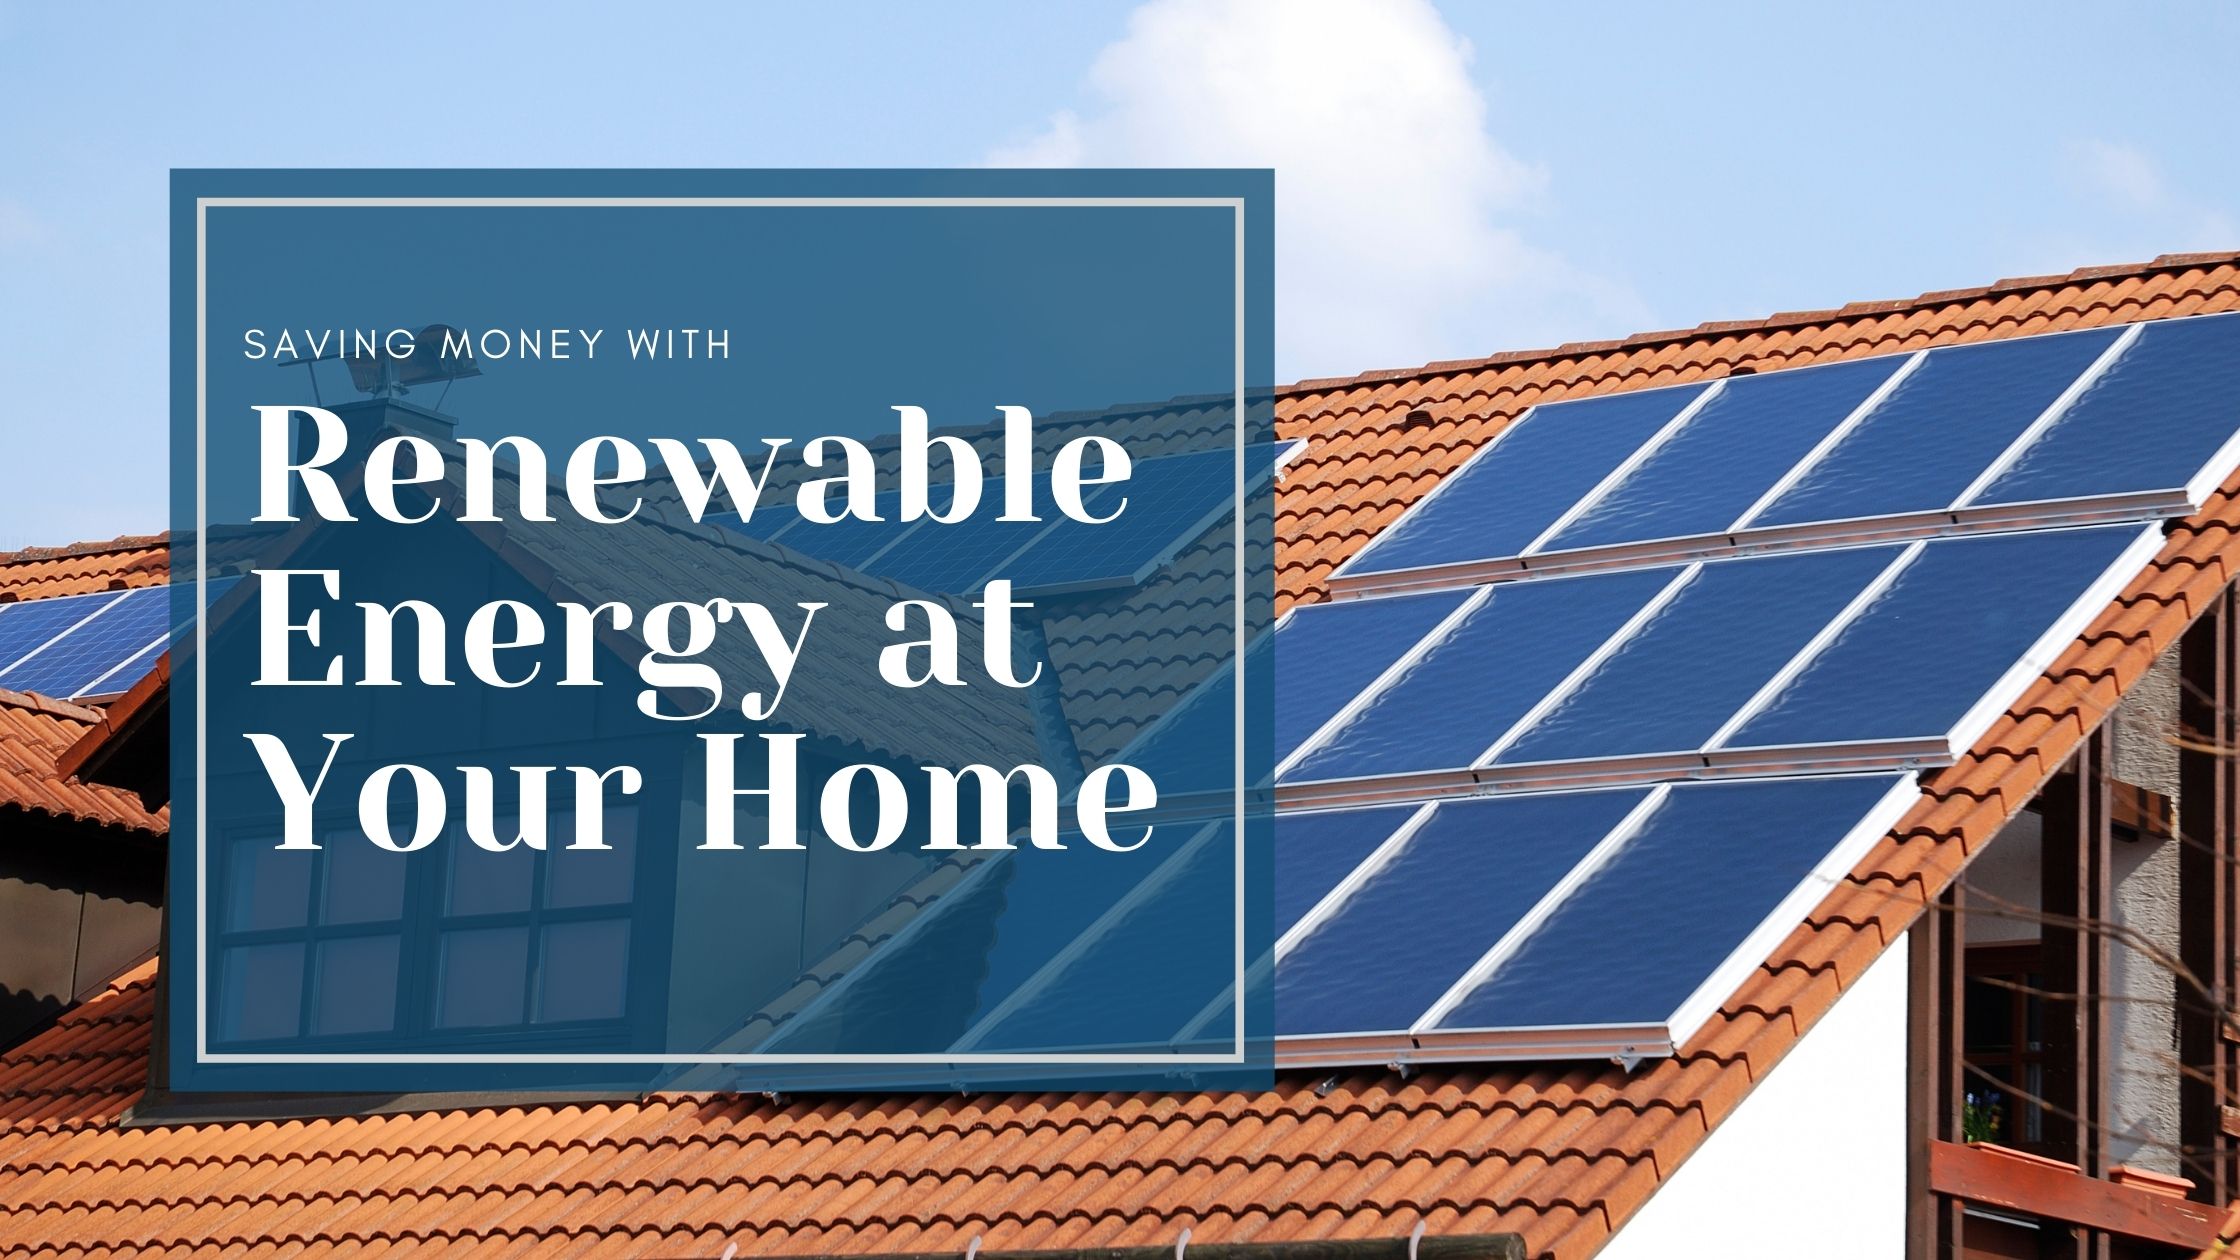 H&S Powersolutions: Get more out of your energy with solar panels